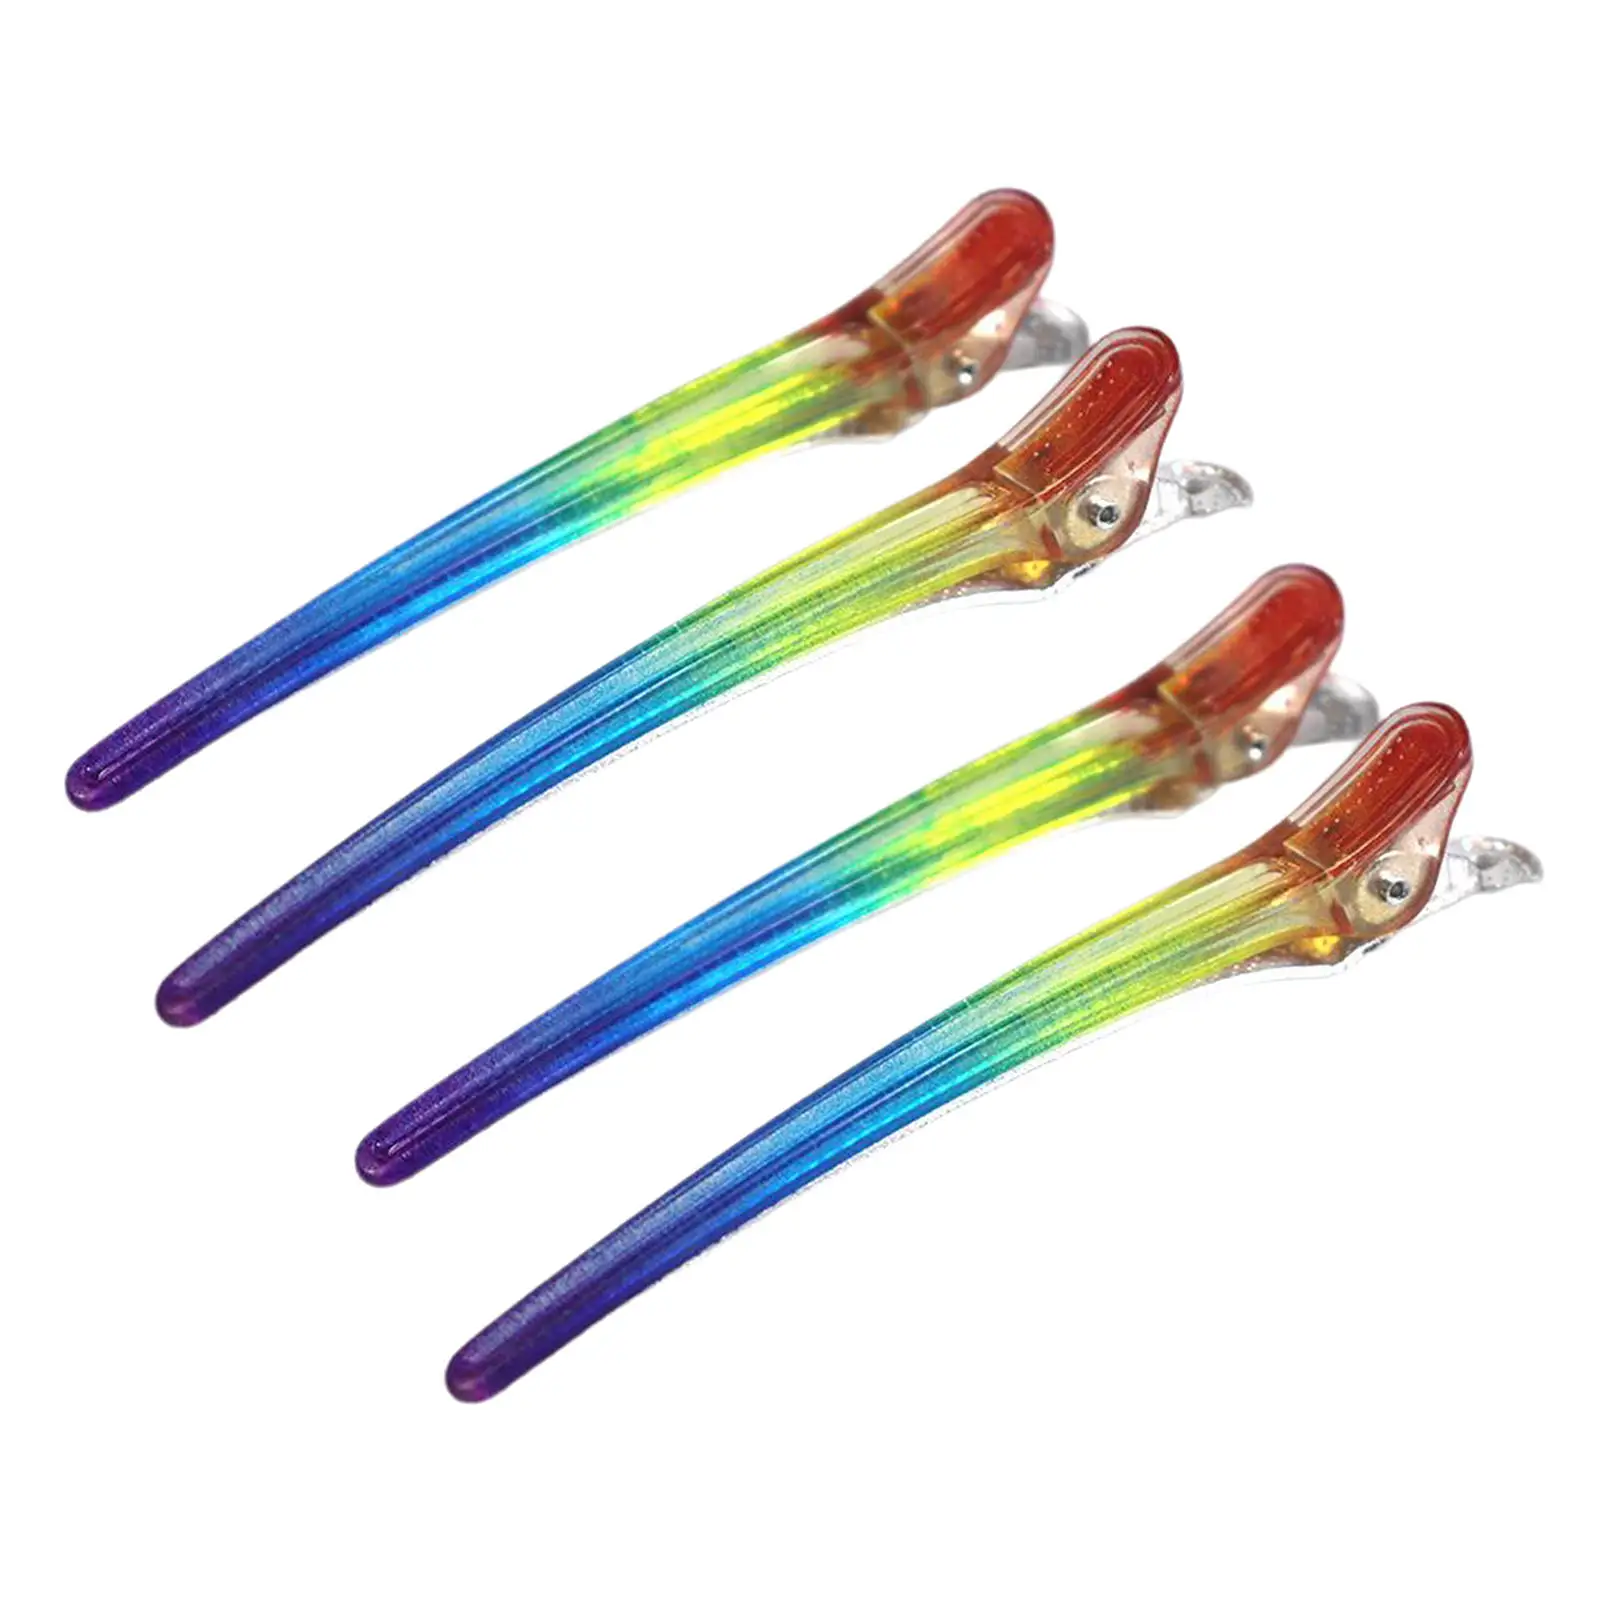 4 Pcs Dividing Duck Bill Clips Clamp. Hair Styling Clips. Hairpin Hairdressing Sectioning For Salon Styling Tools Rainbow